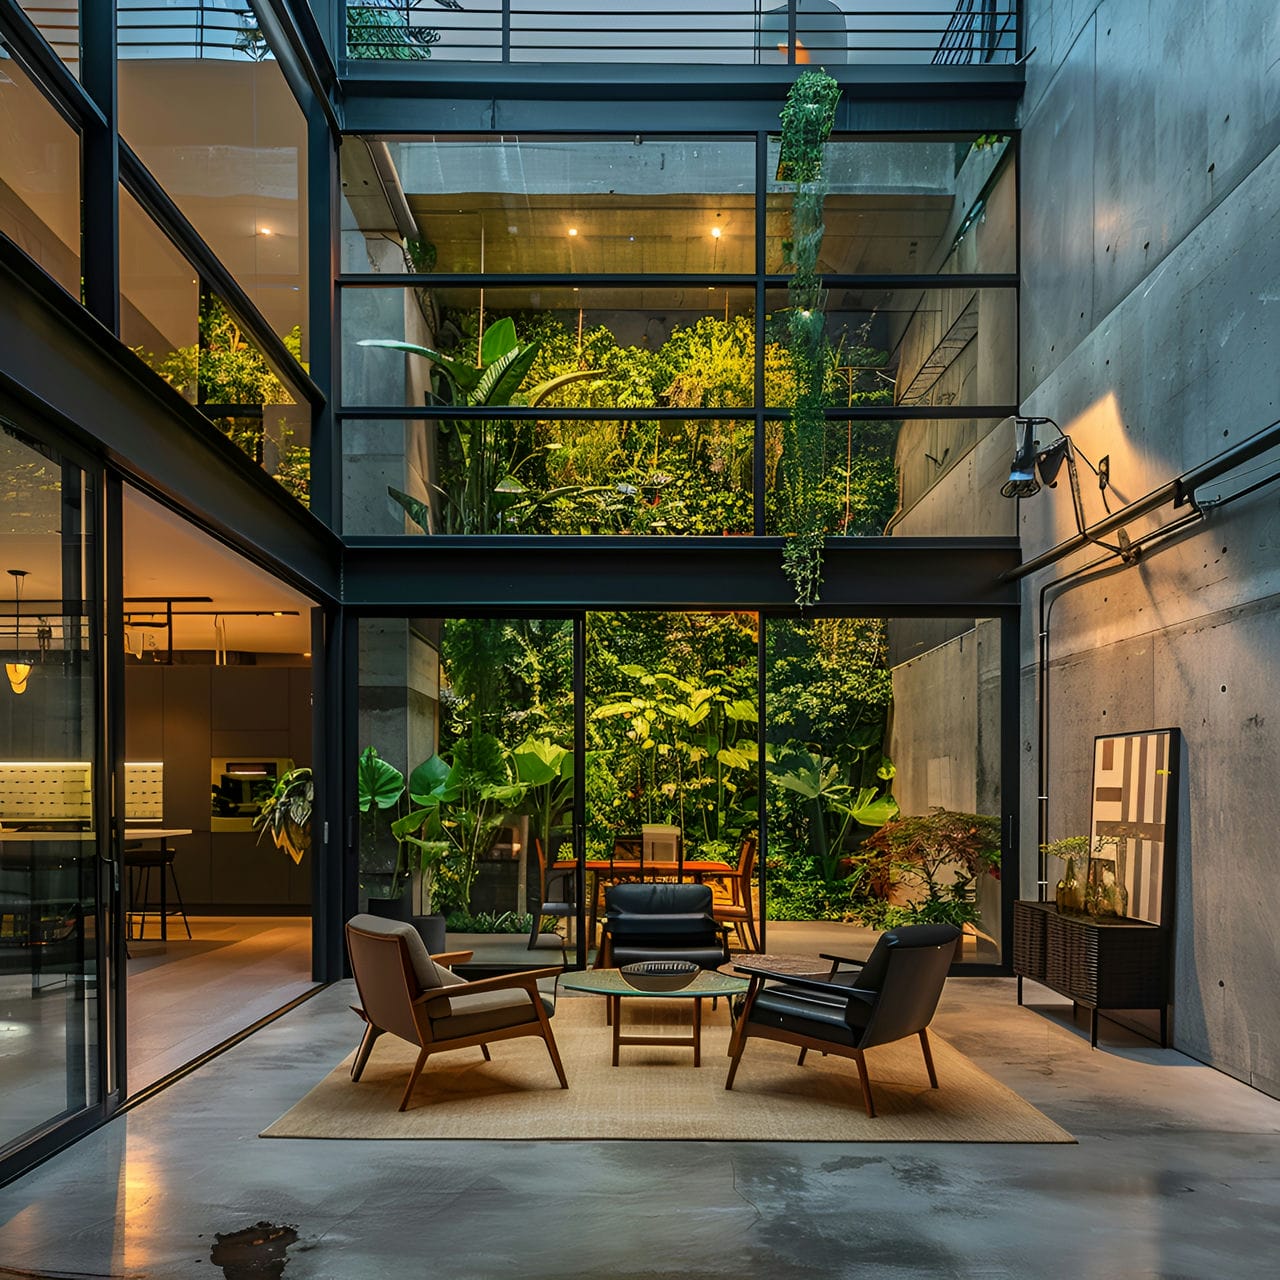 Atrium: size, functionality, uses, furniture and renovation